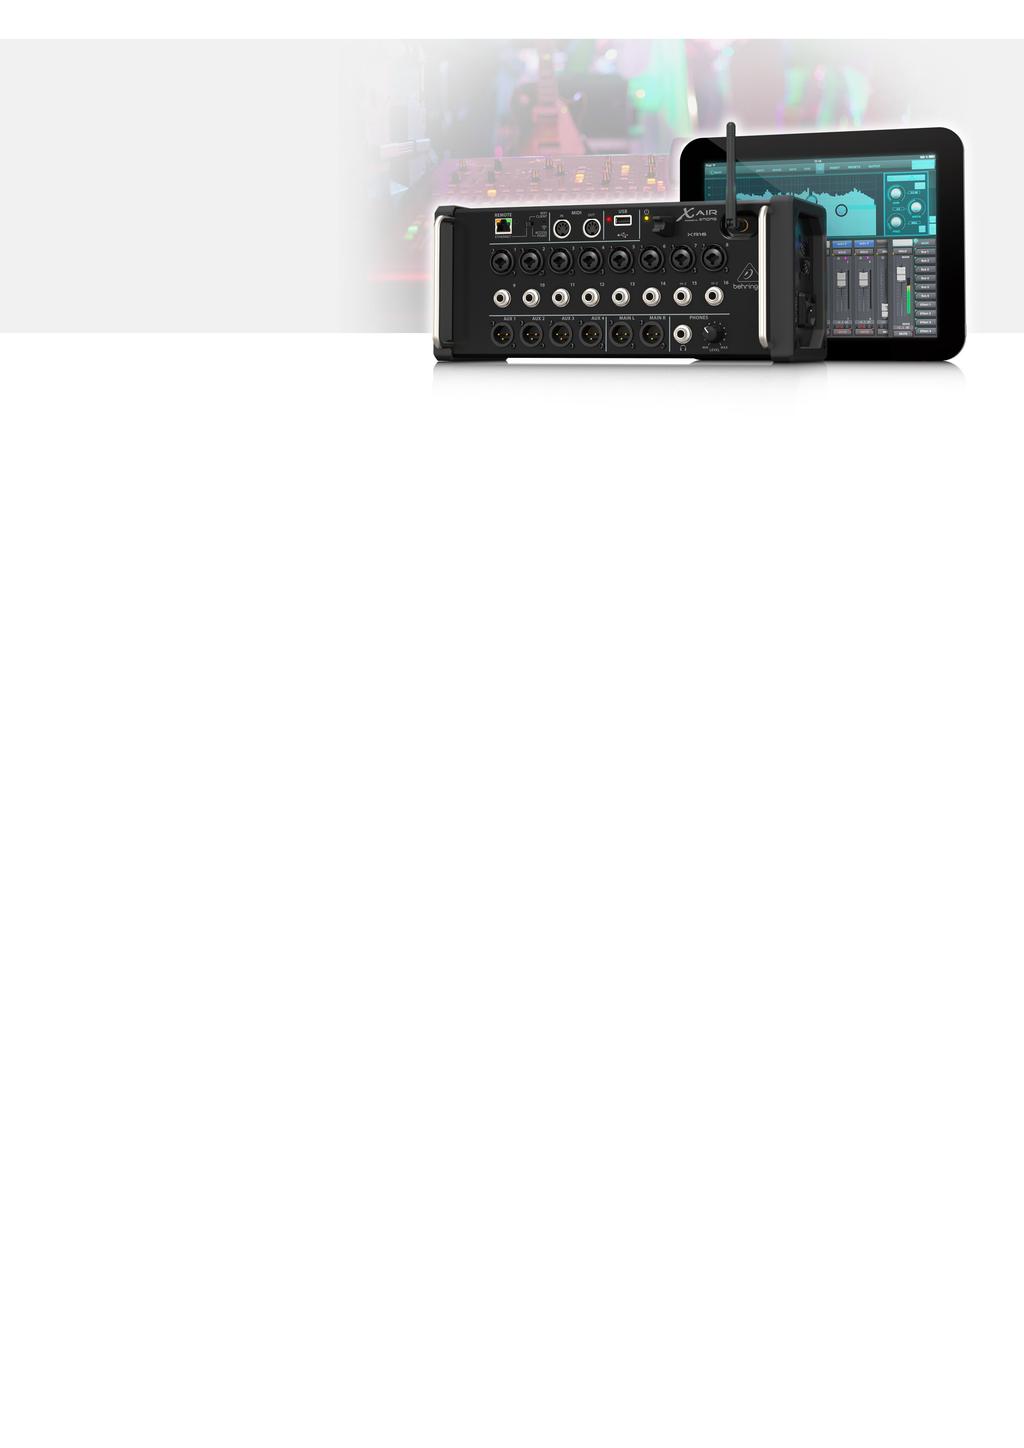 Product Information Document ipad*/android* tablet controlled 16-input digital mixer for studio and live application 8 award-winning MIDAS-designed, fully programmable mic preamps for audiophile